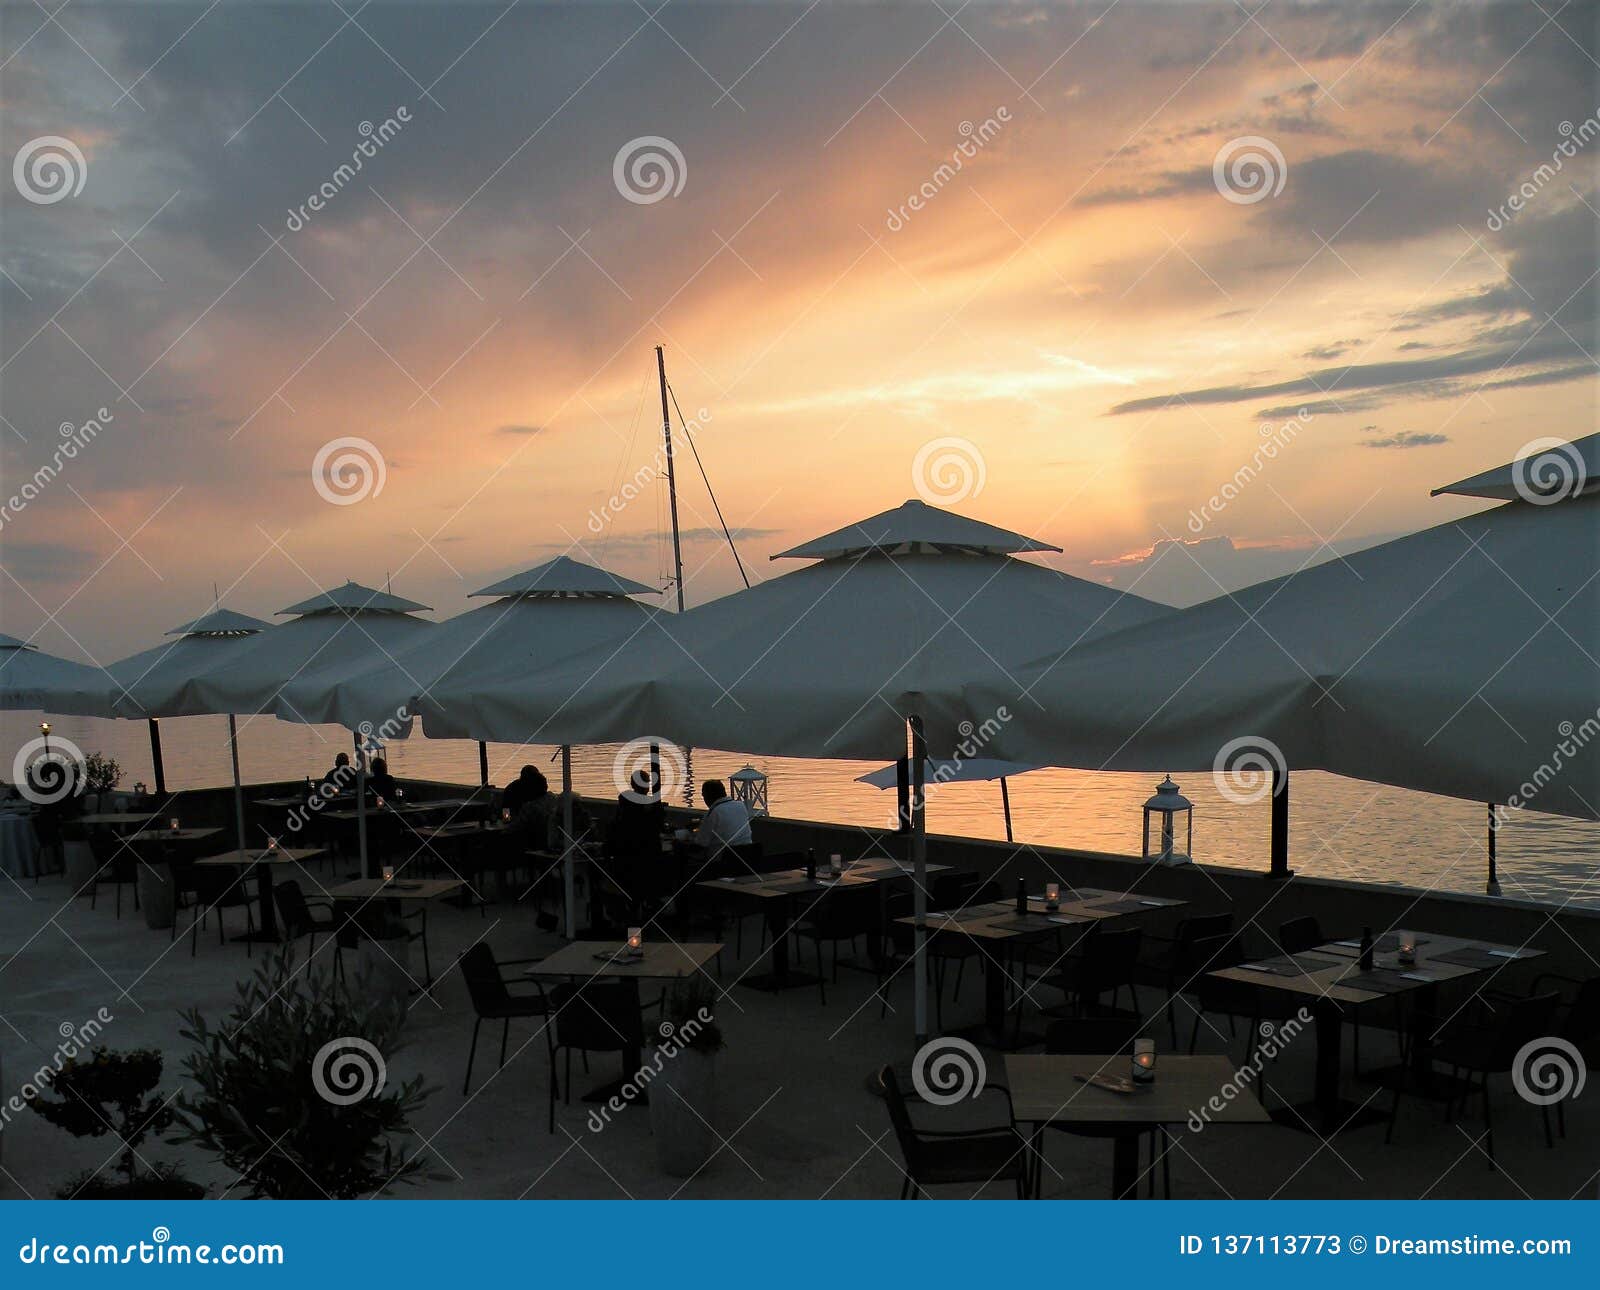 People at Dinner, Tables Under White Umbrellas.Restaurant by the Sea ...